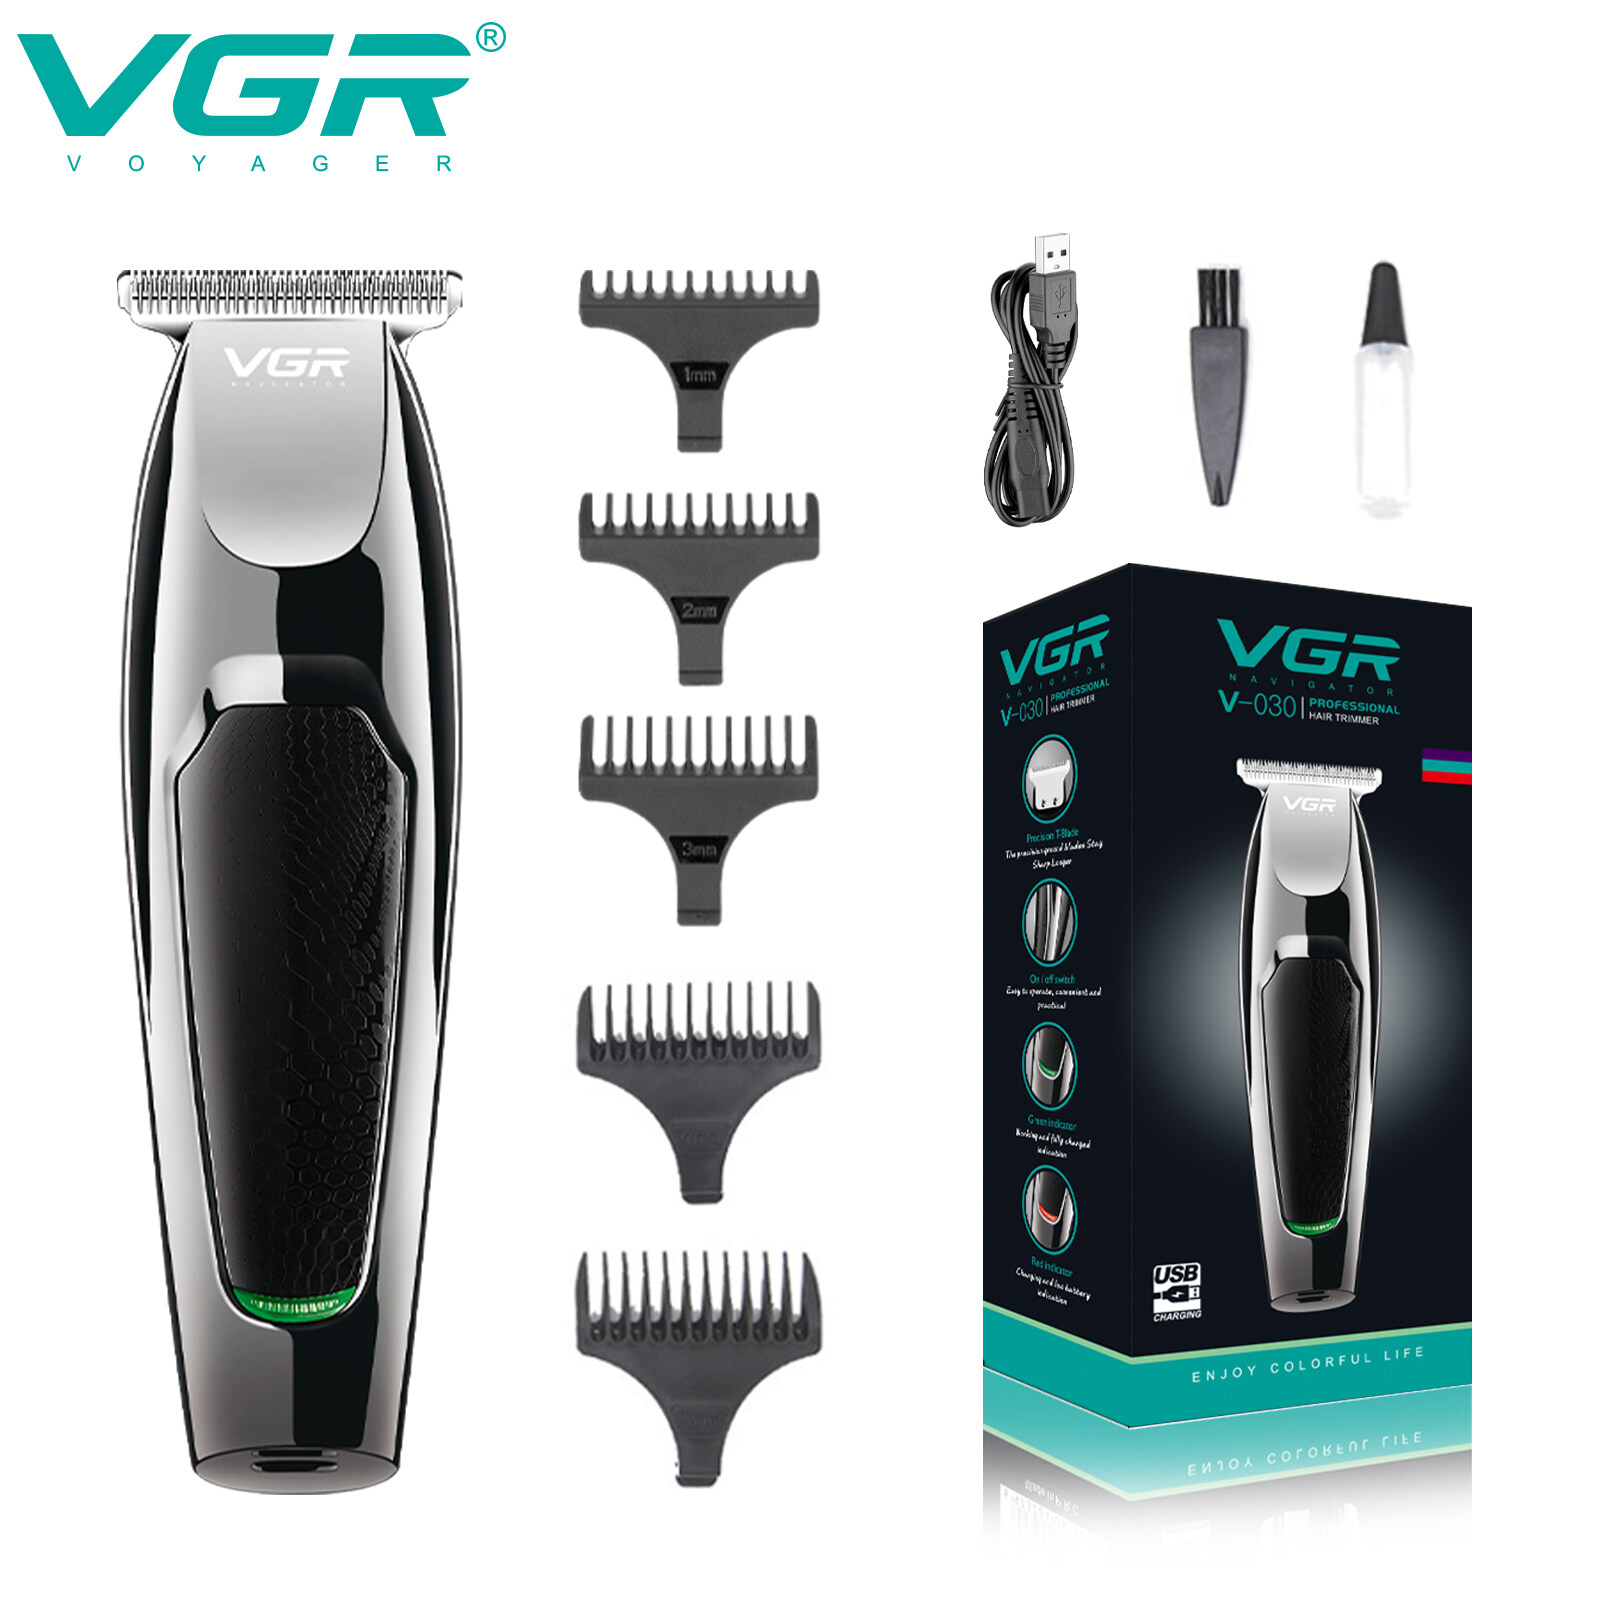 mens travel electric shaver sale, wholesale Rechargeable Beard Trimmer, china hair trimmer manufacturers, newstyle hair clipper supplier, wholesale hair trimmer